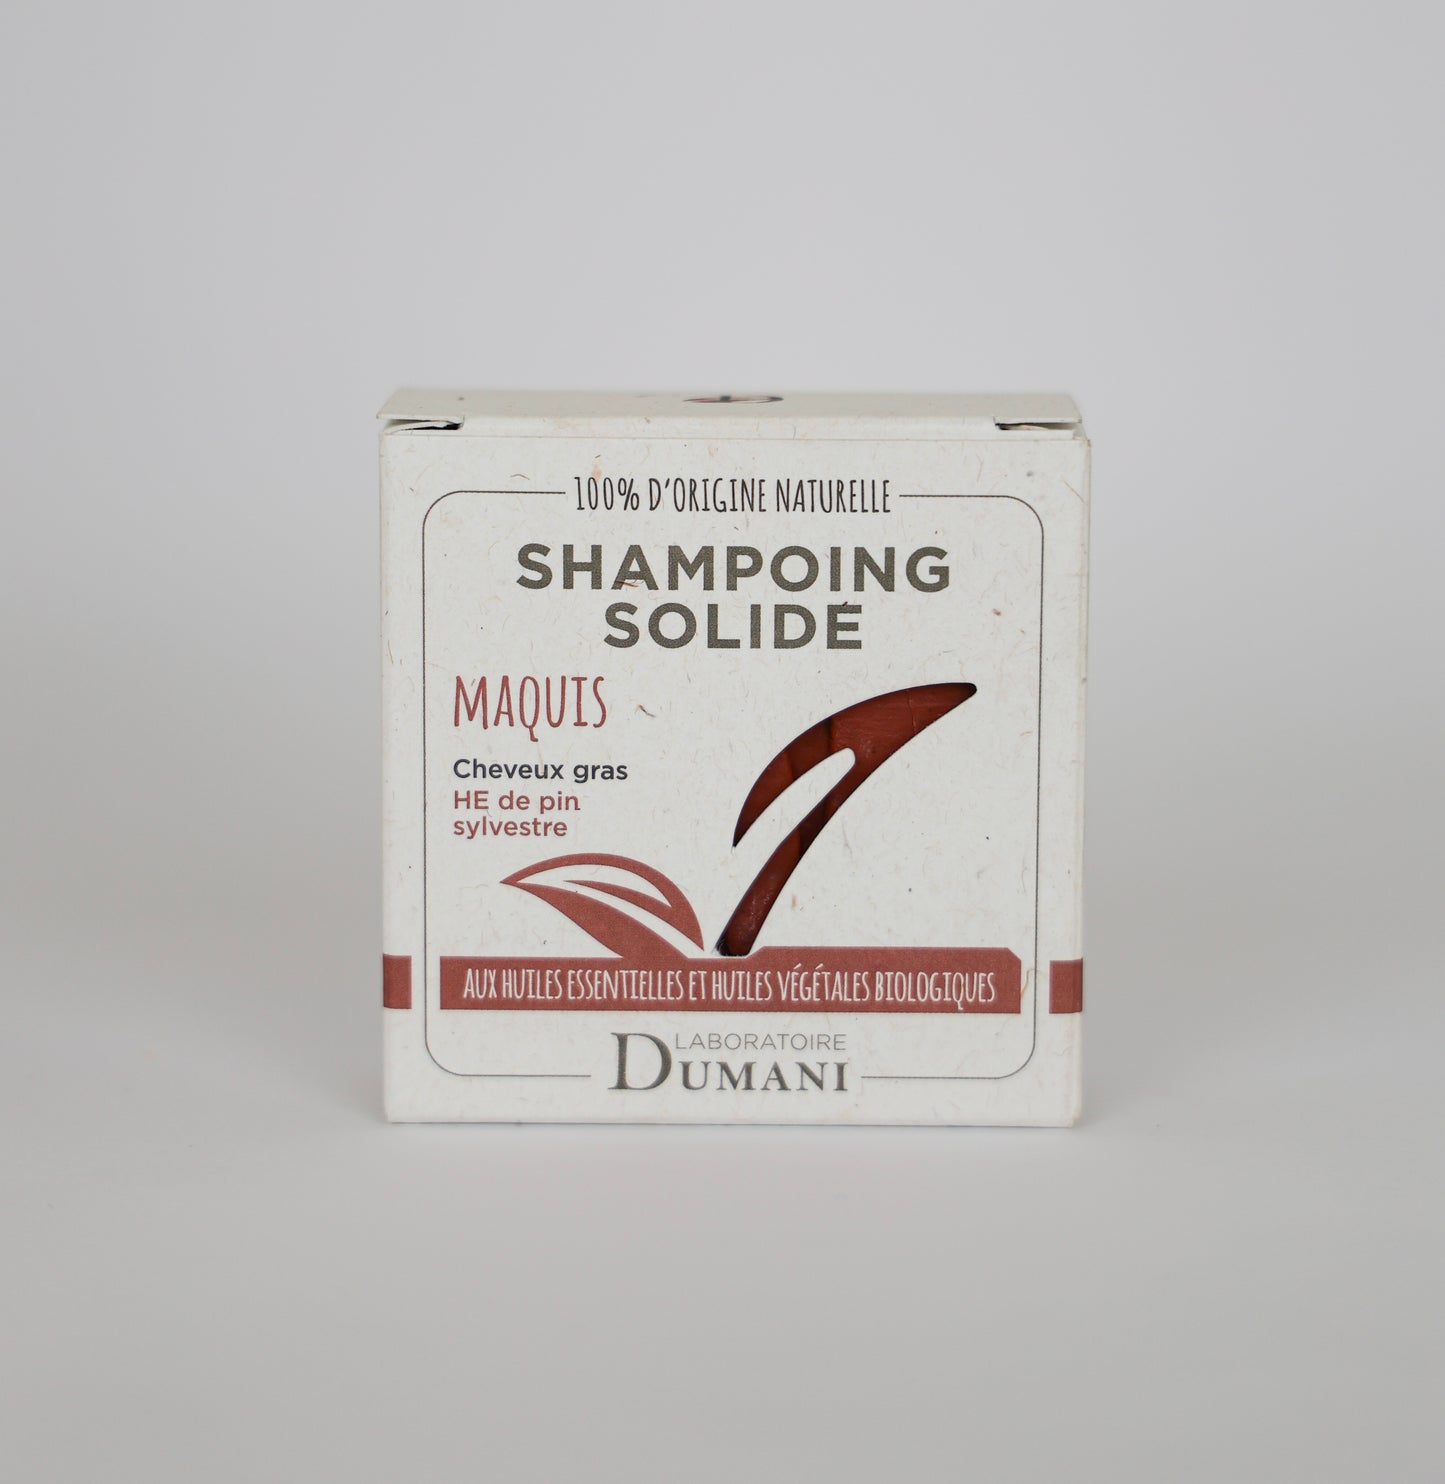 Shampoing solide - Maquis